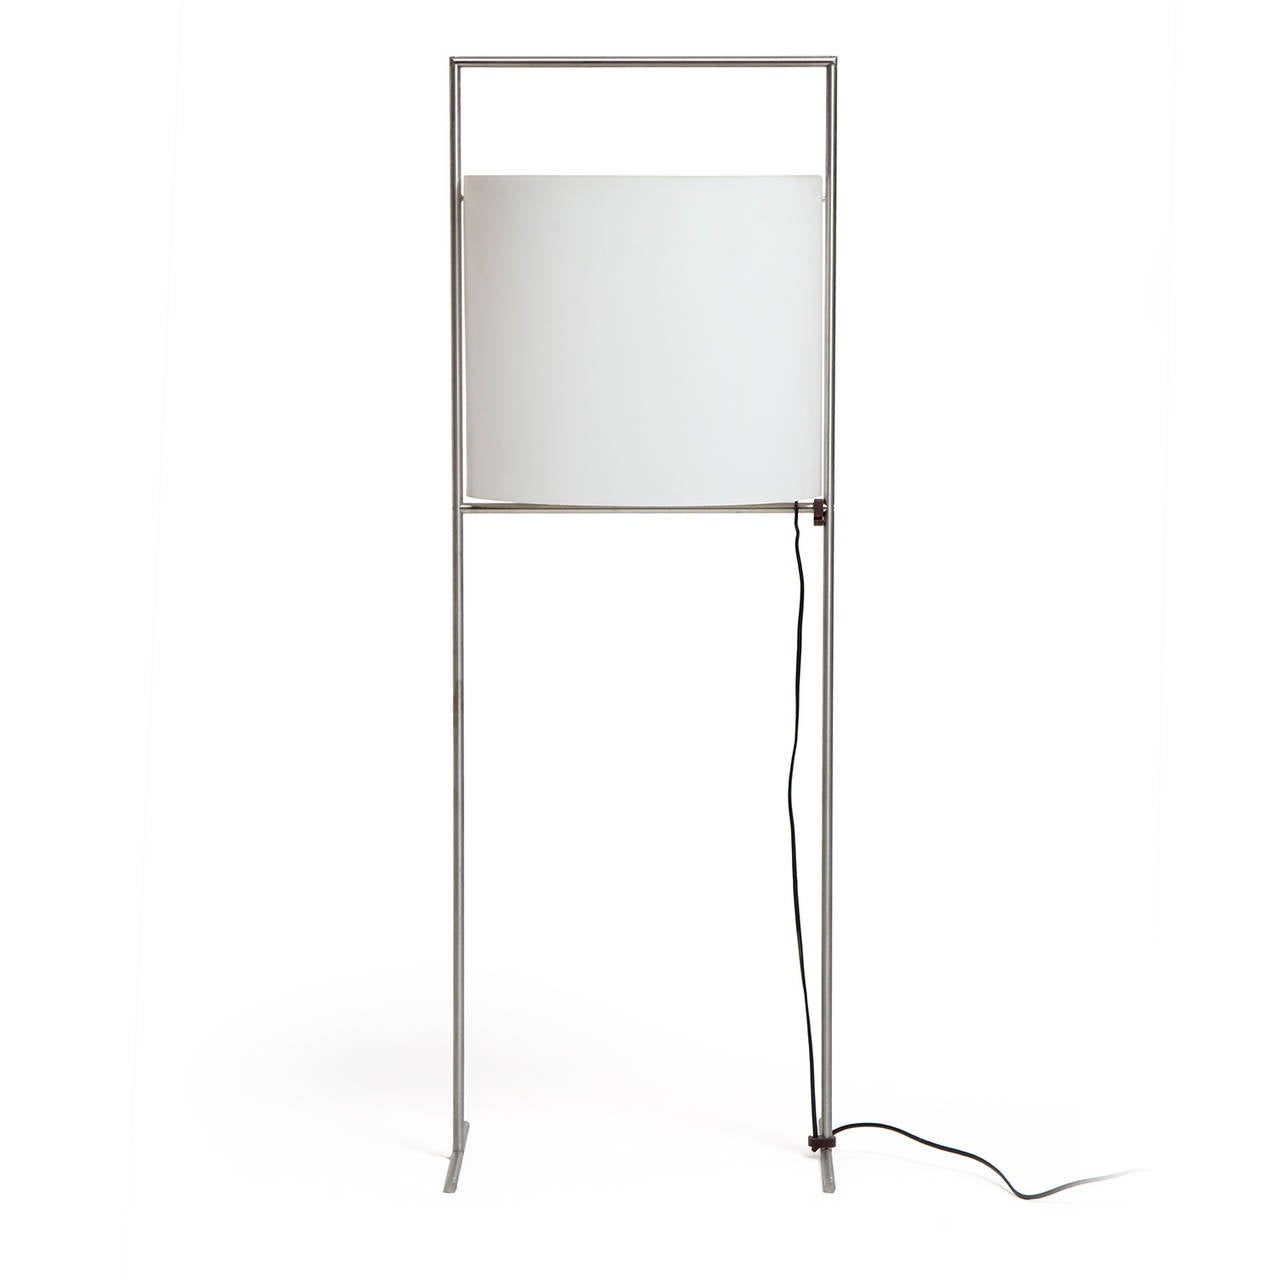 Late 20th Century Italian Glass and Steel Floor Lamp For Sale